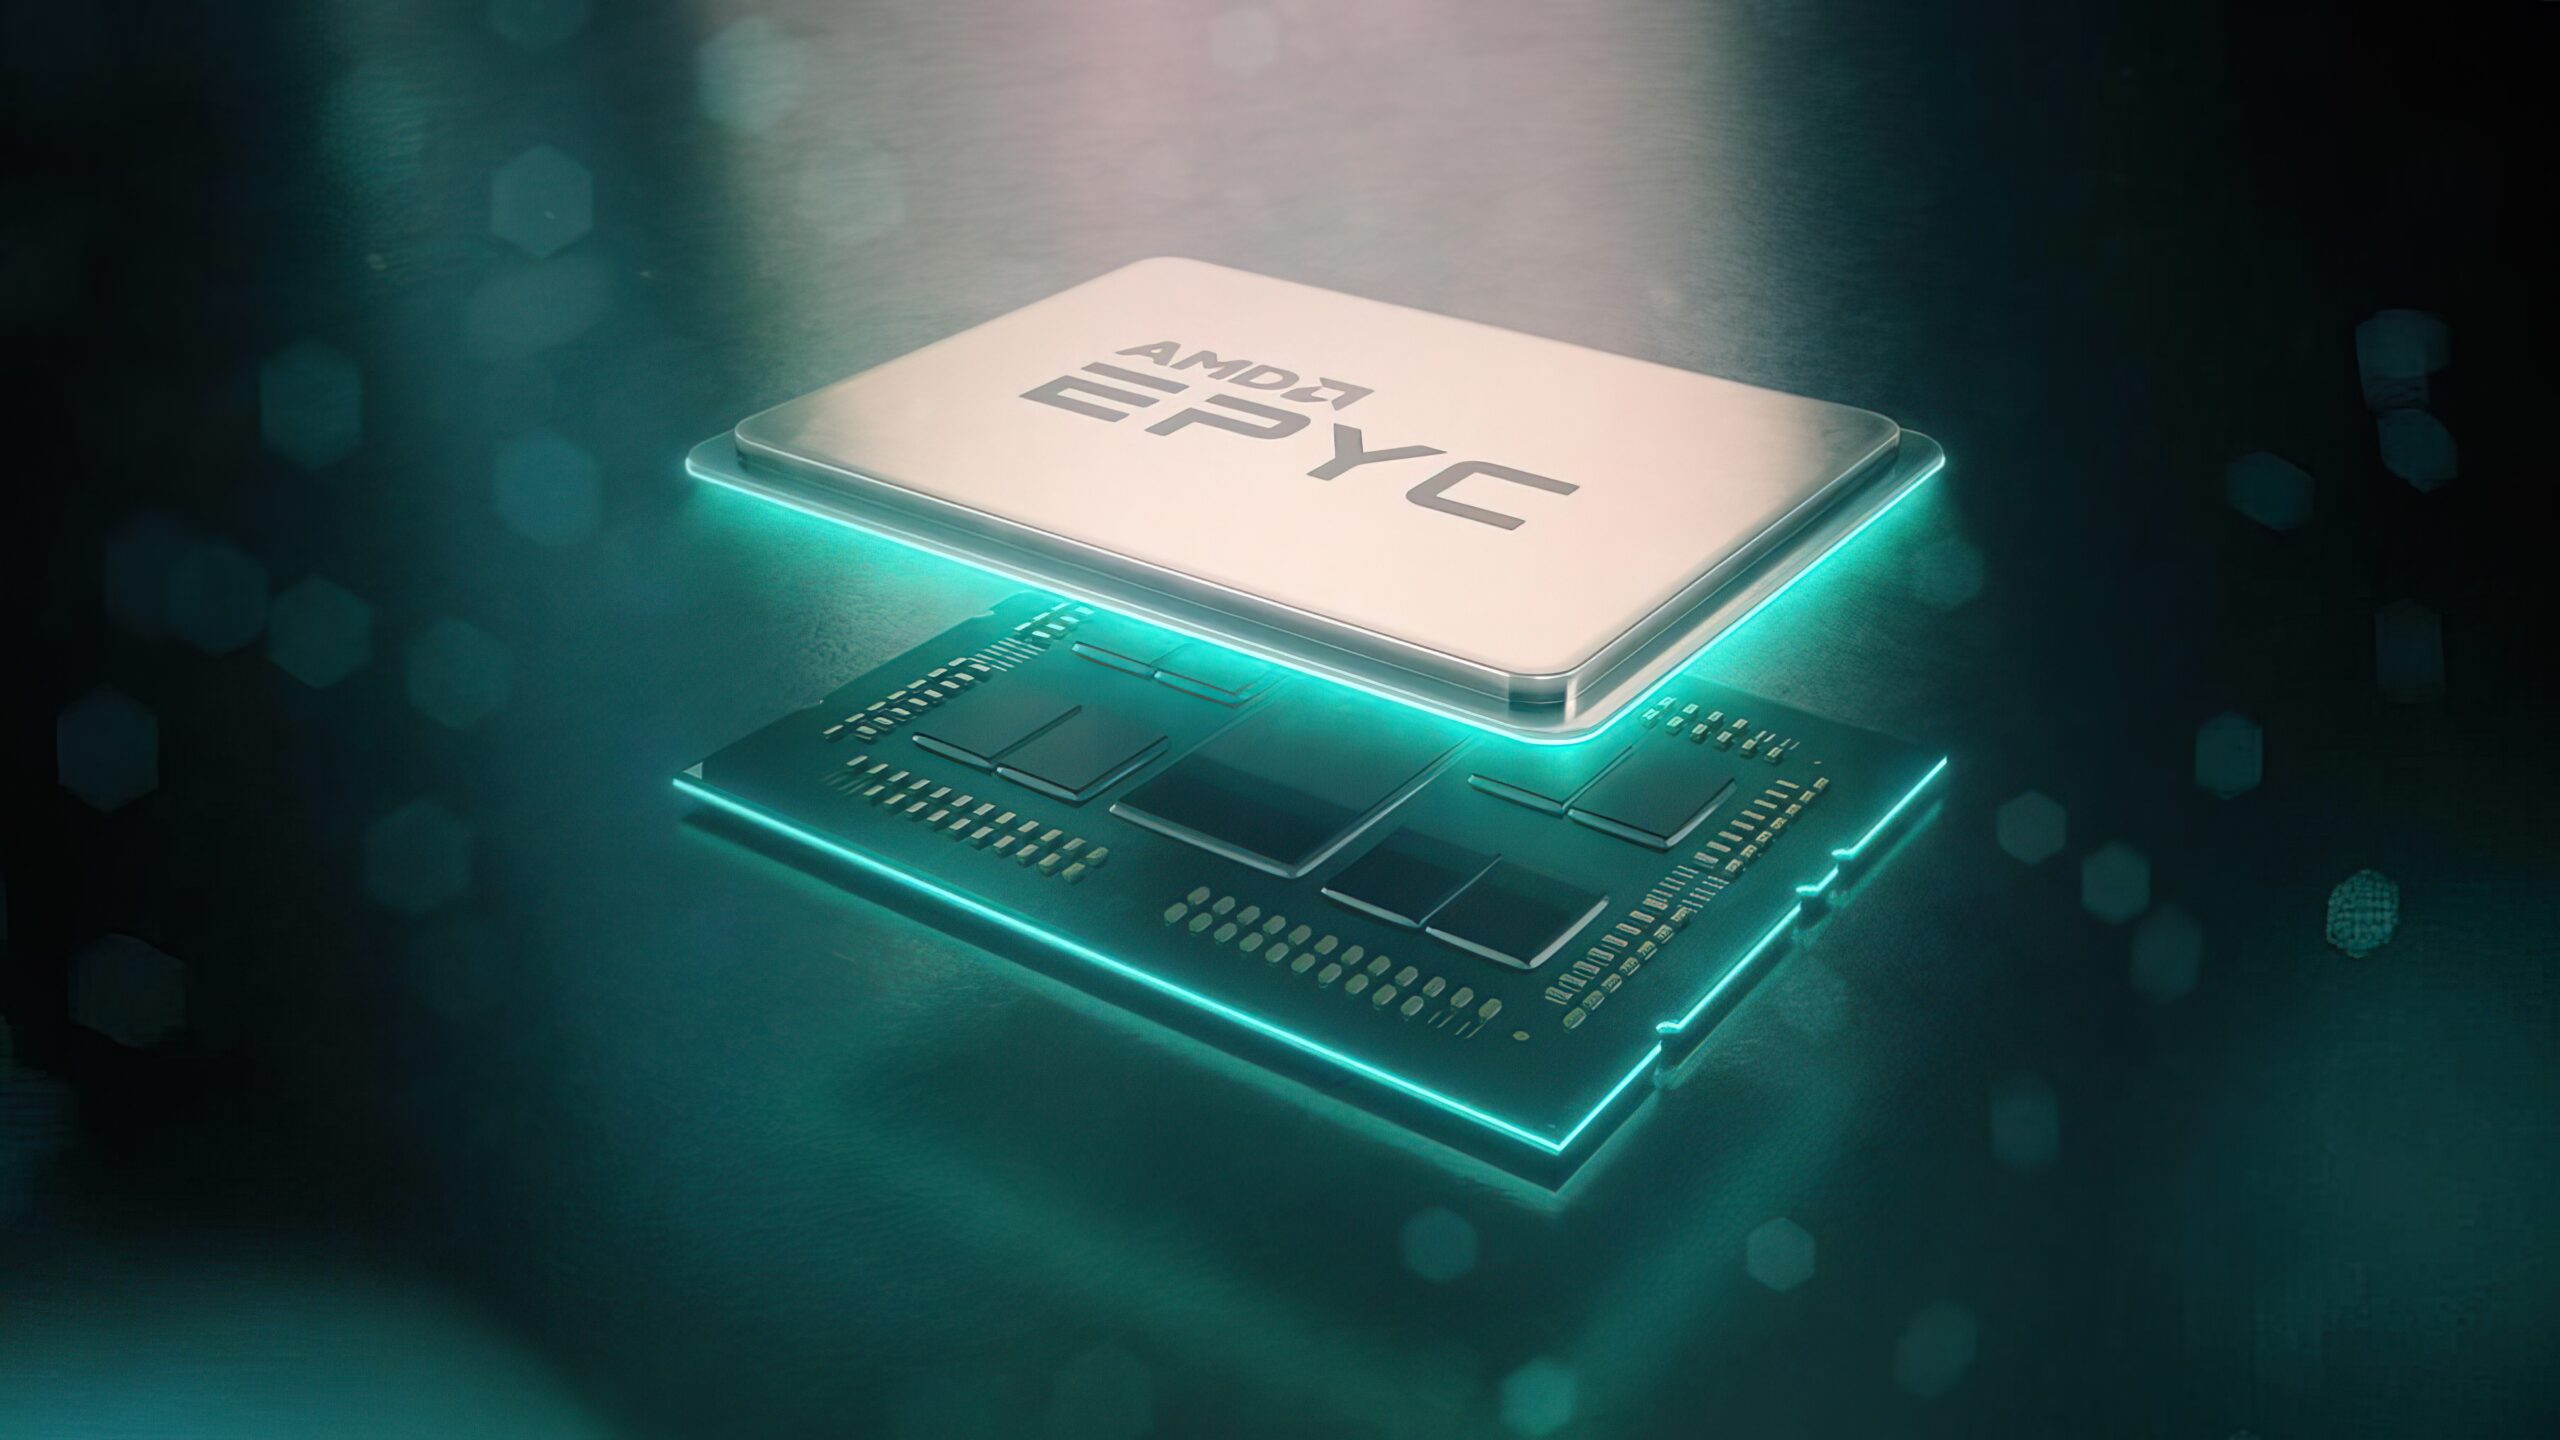 In about a year, AMD will release processors with 192 cores.  And Epyc Turin-X will carry up to 1.5 GB of L3 cache